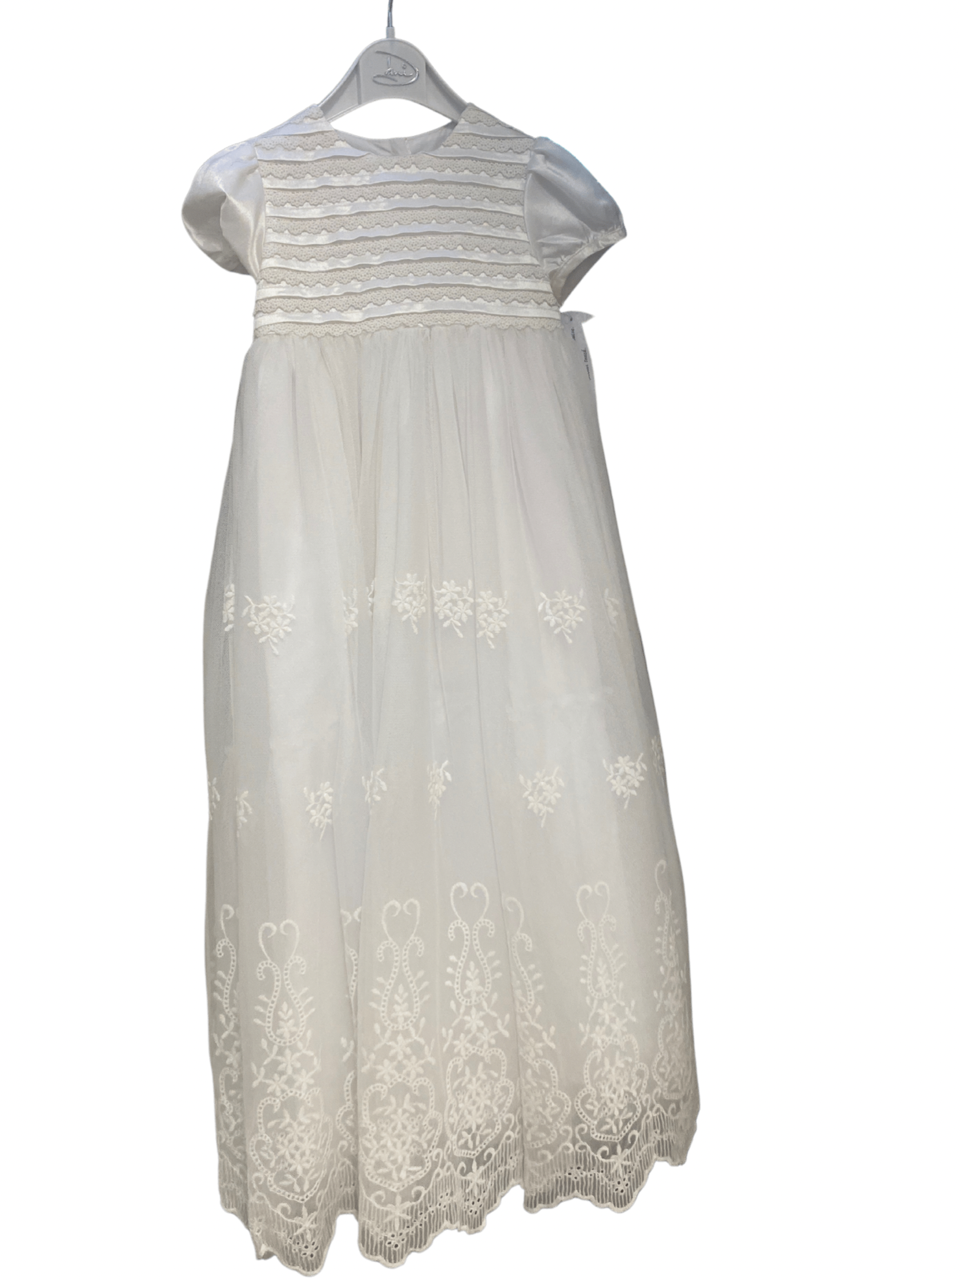 Girls Christening Gown Style 1165 - Sarah Louise Christening Gown